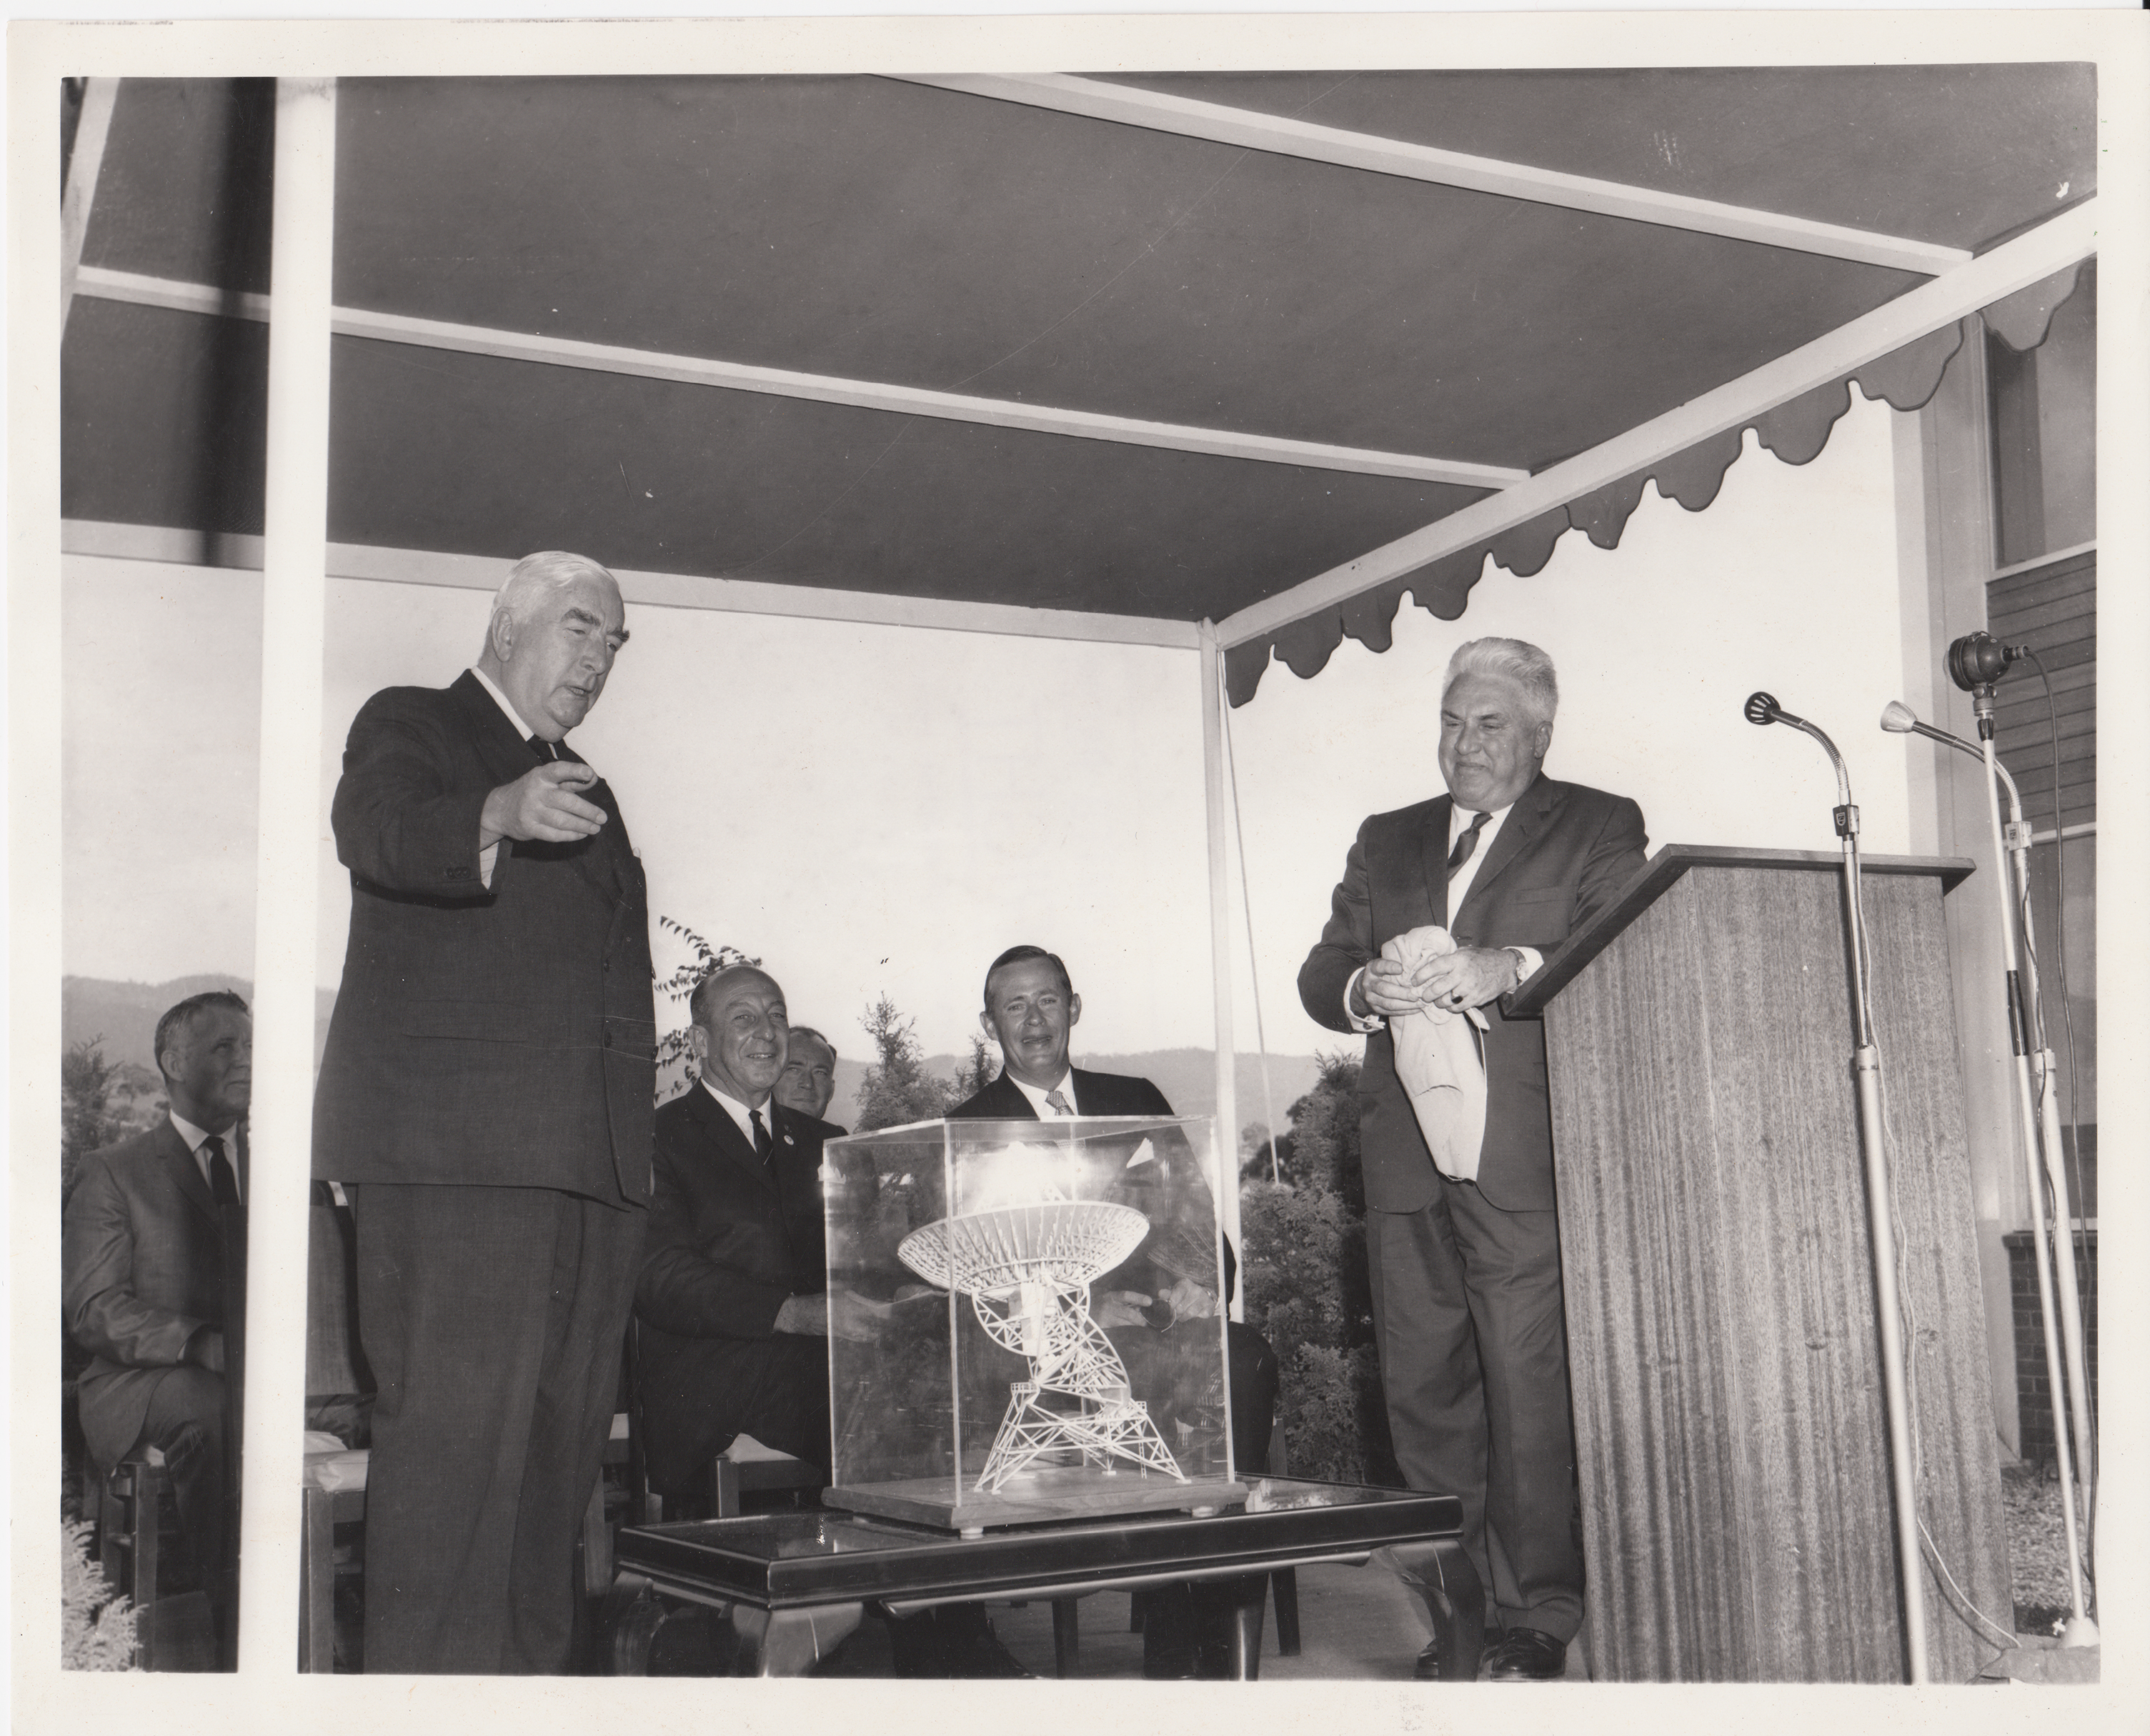 1965: Prime Minister Sir Robert Menzies is presented a model of a 26-m deep space station antenna at the opening of the Tidbinbilla Deep Space Instrument Facility, today known as the CDSCC.